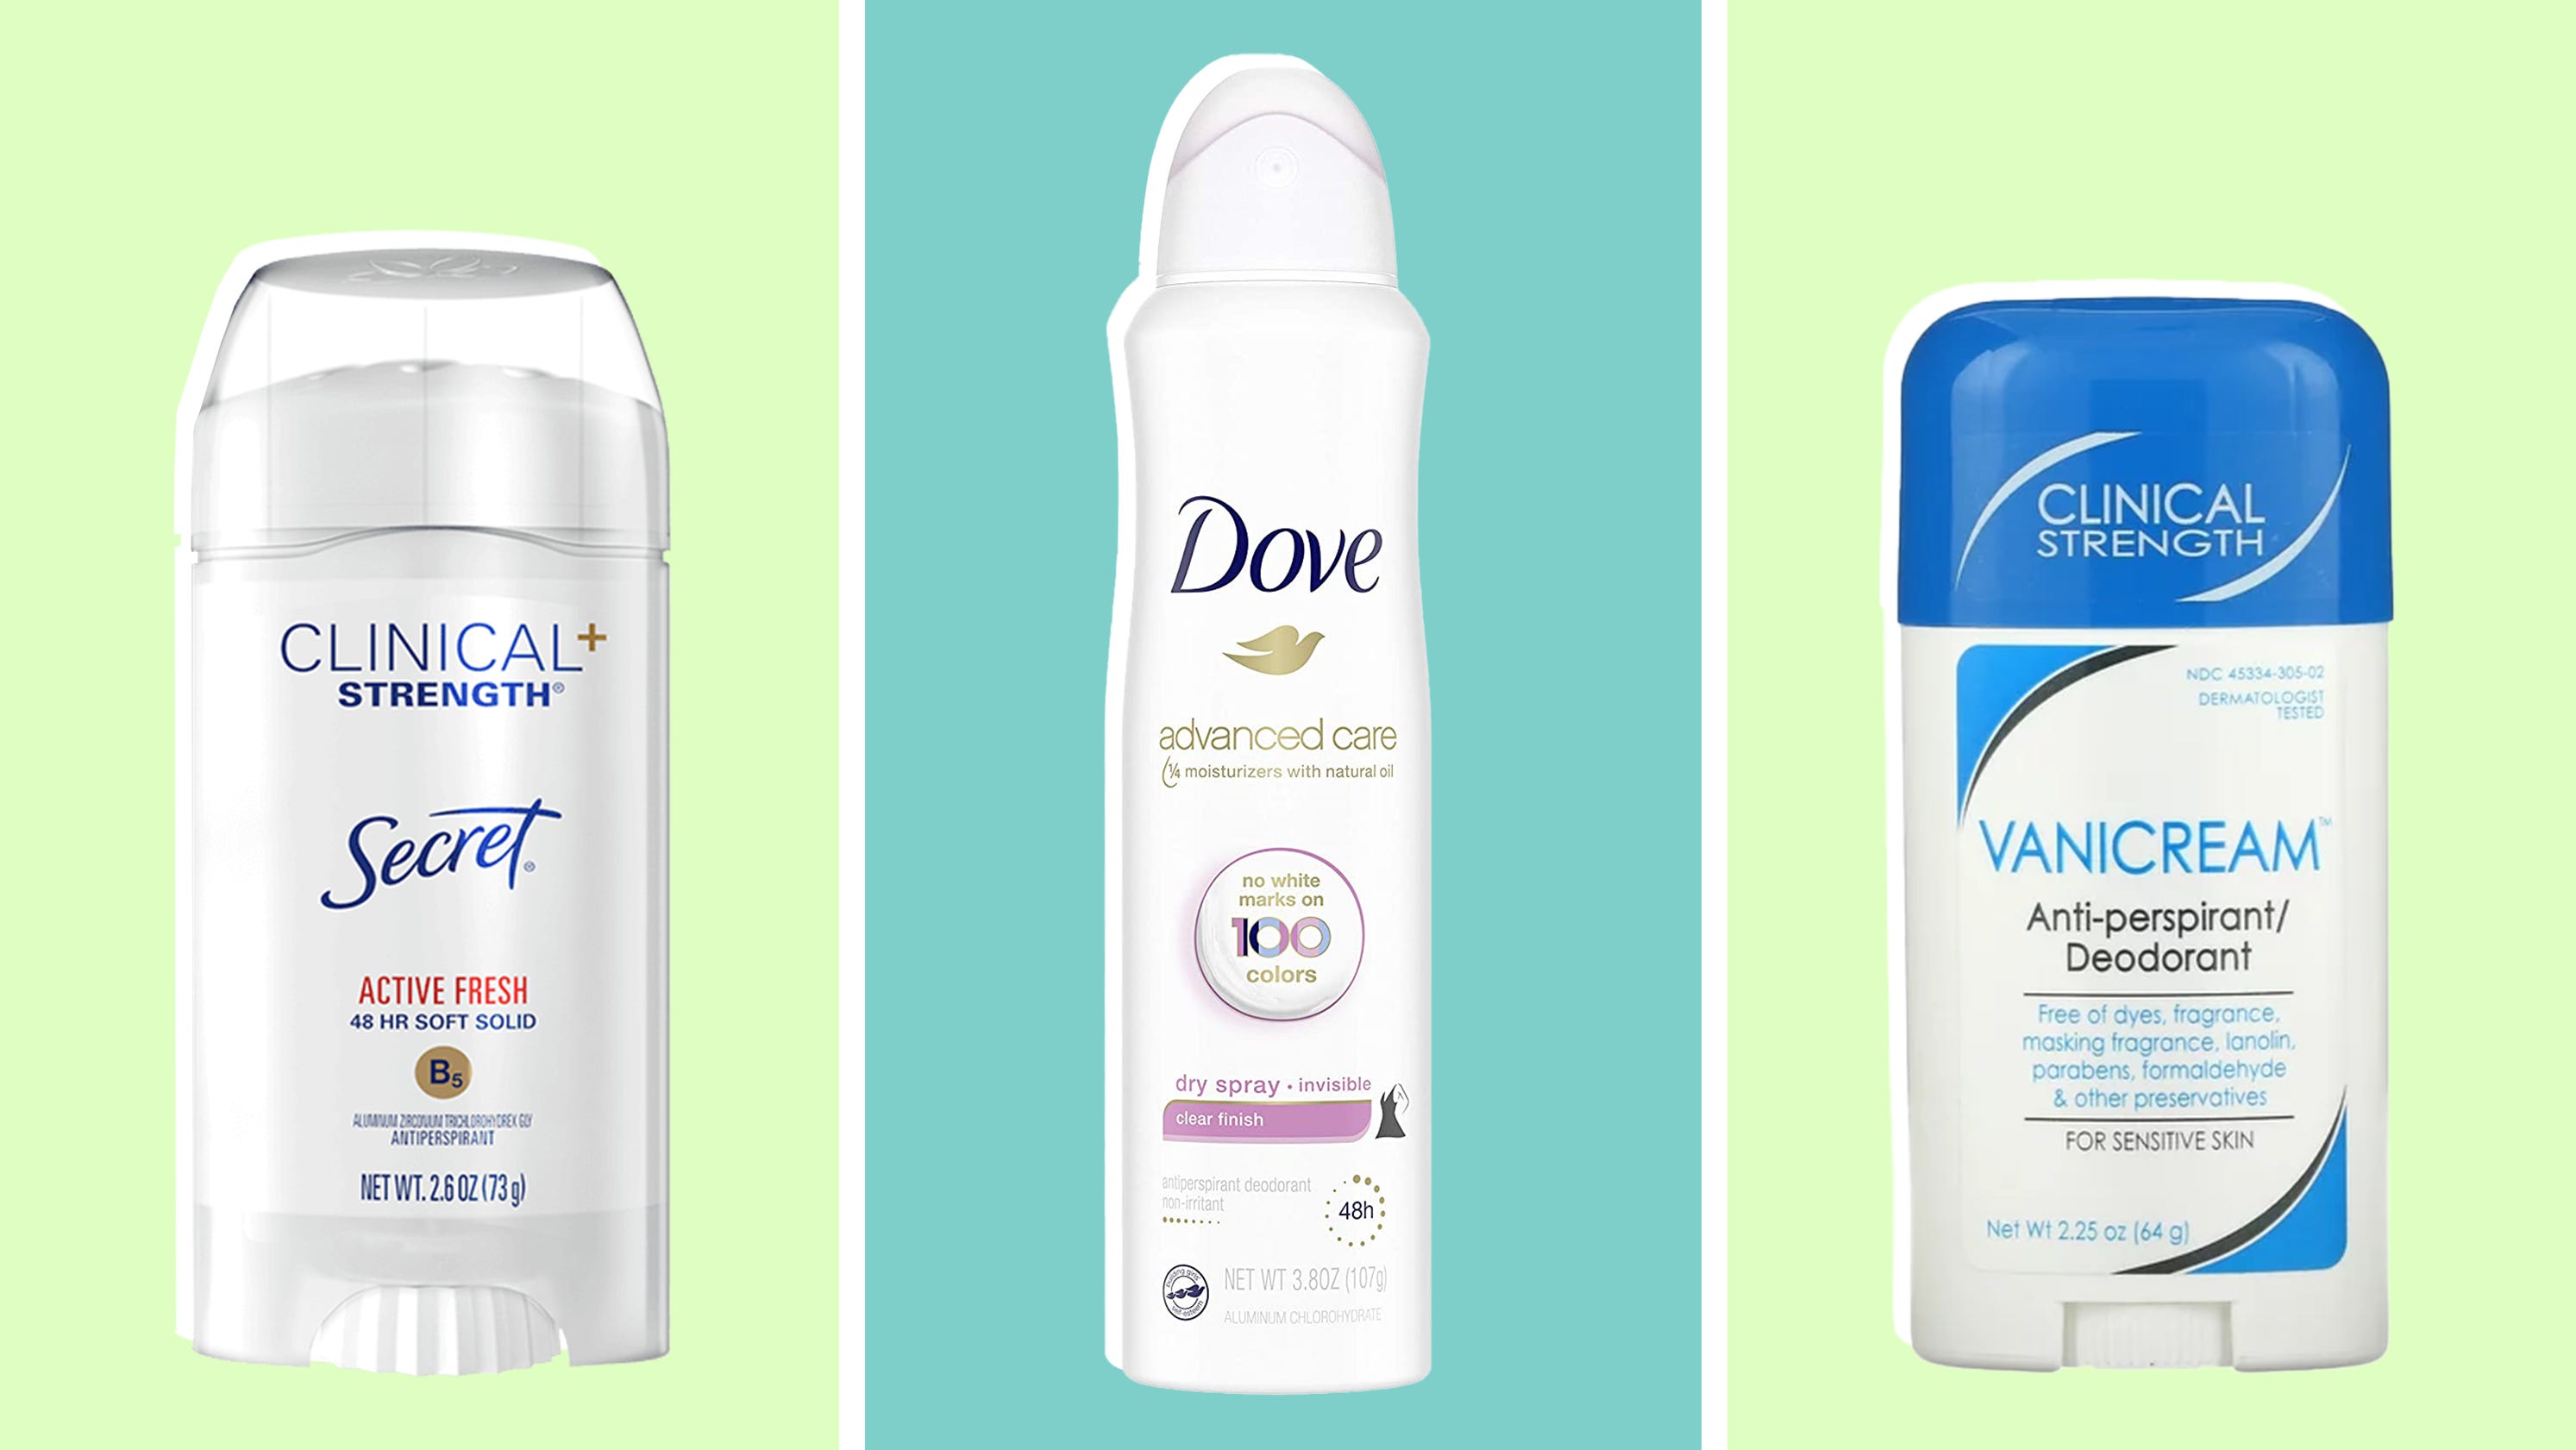 popular deodorants: Stop sweat with options from Degree